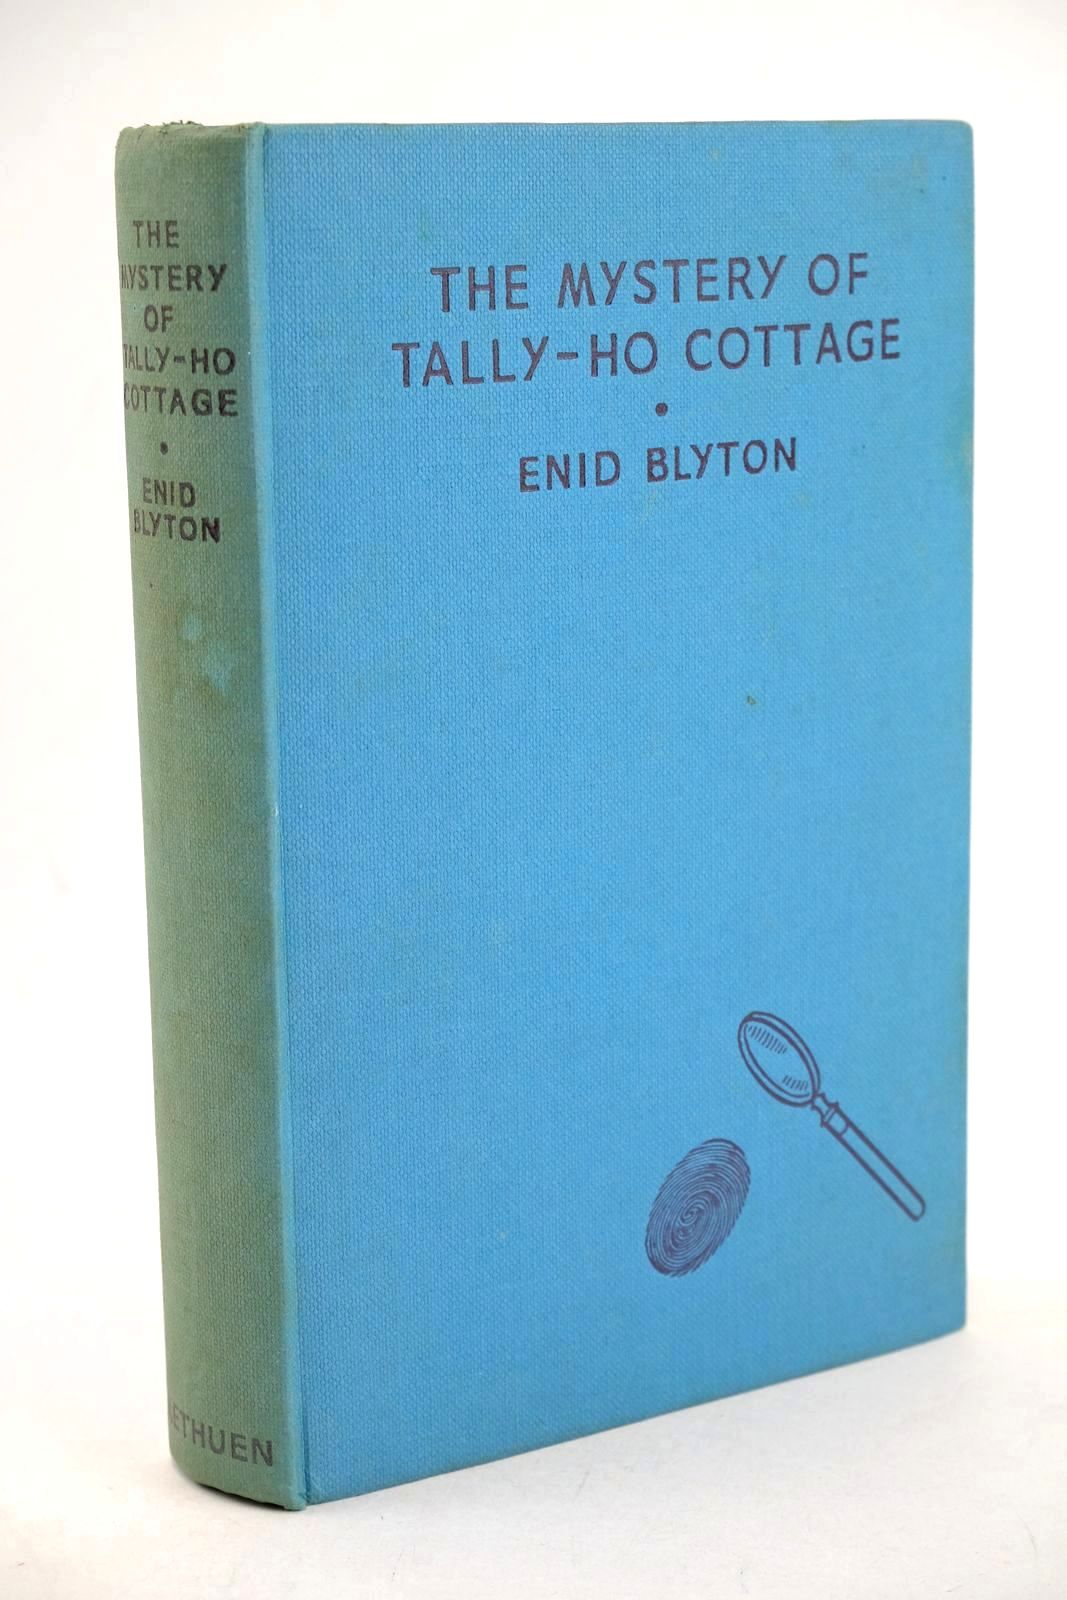 Photo of THE MYSTERY OF TALLY-HO COTTAGE written by Blyton, Enid illustrated by Evans, Treyer published by Methuen &amp; Co. Ltd. (STOCK CODE: 1326922)  for sale by Stella & Rose's Books